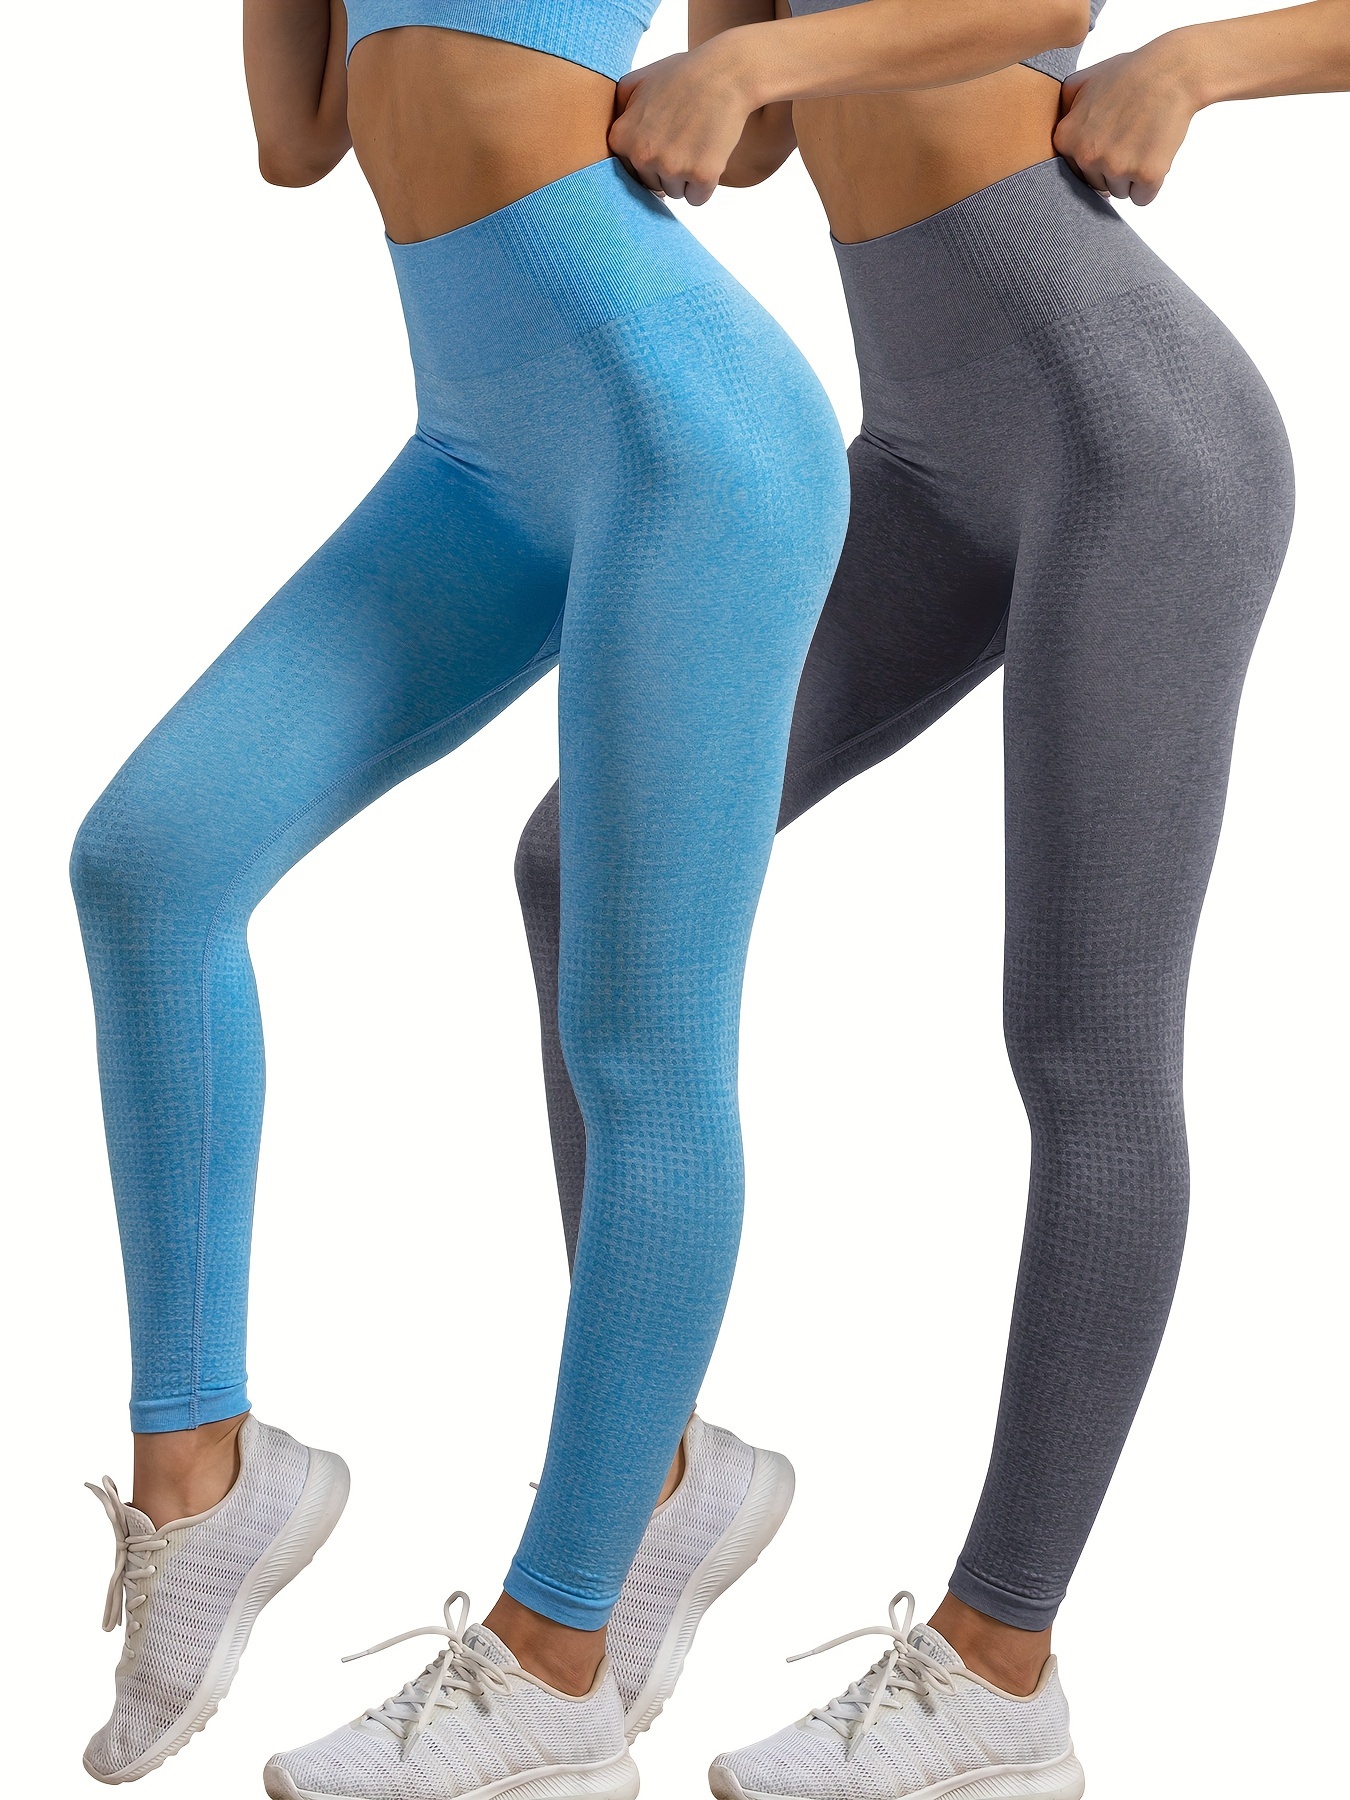 Super Soft Leggings For Women, High Waisted Tummy Control No See Through  Workout Yoga Running Tights, Women's Activewear